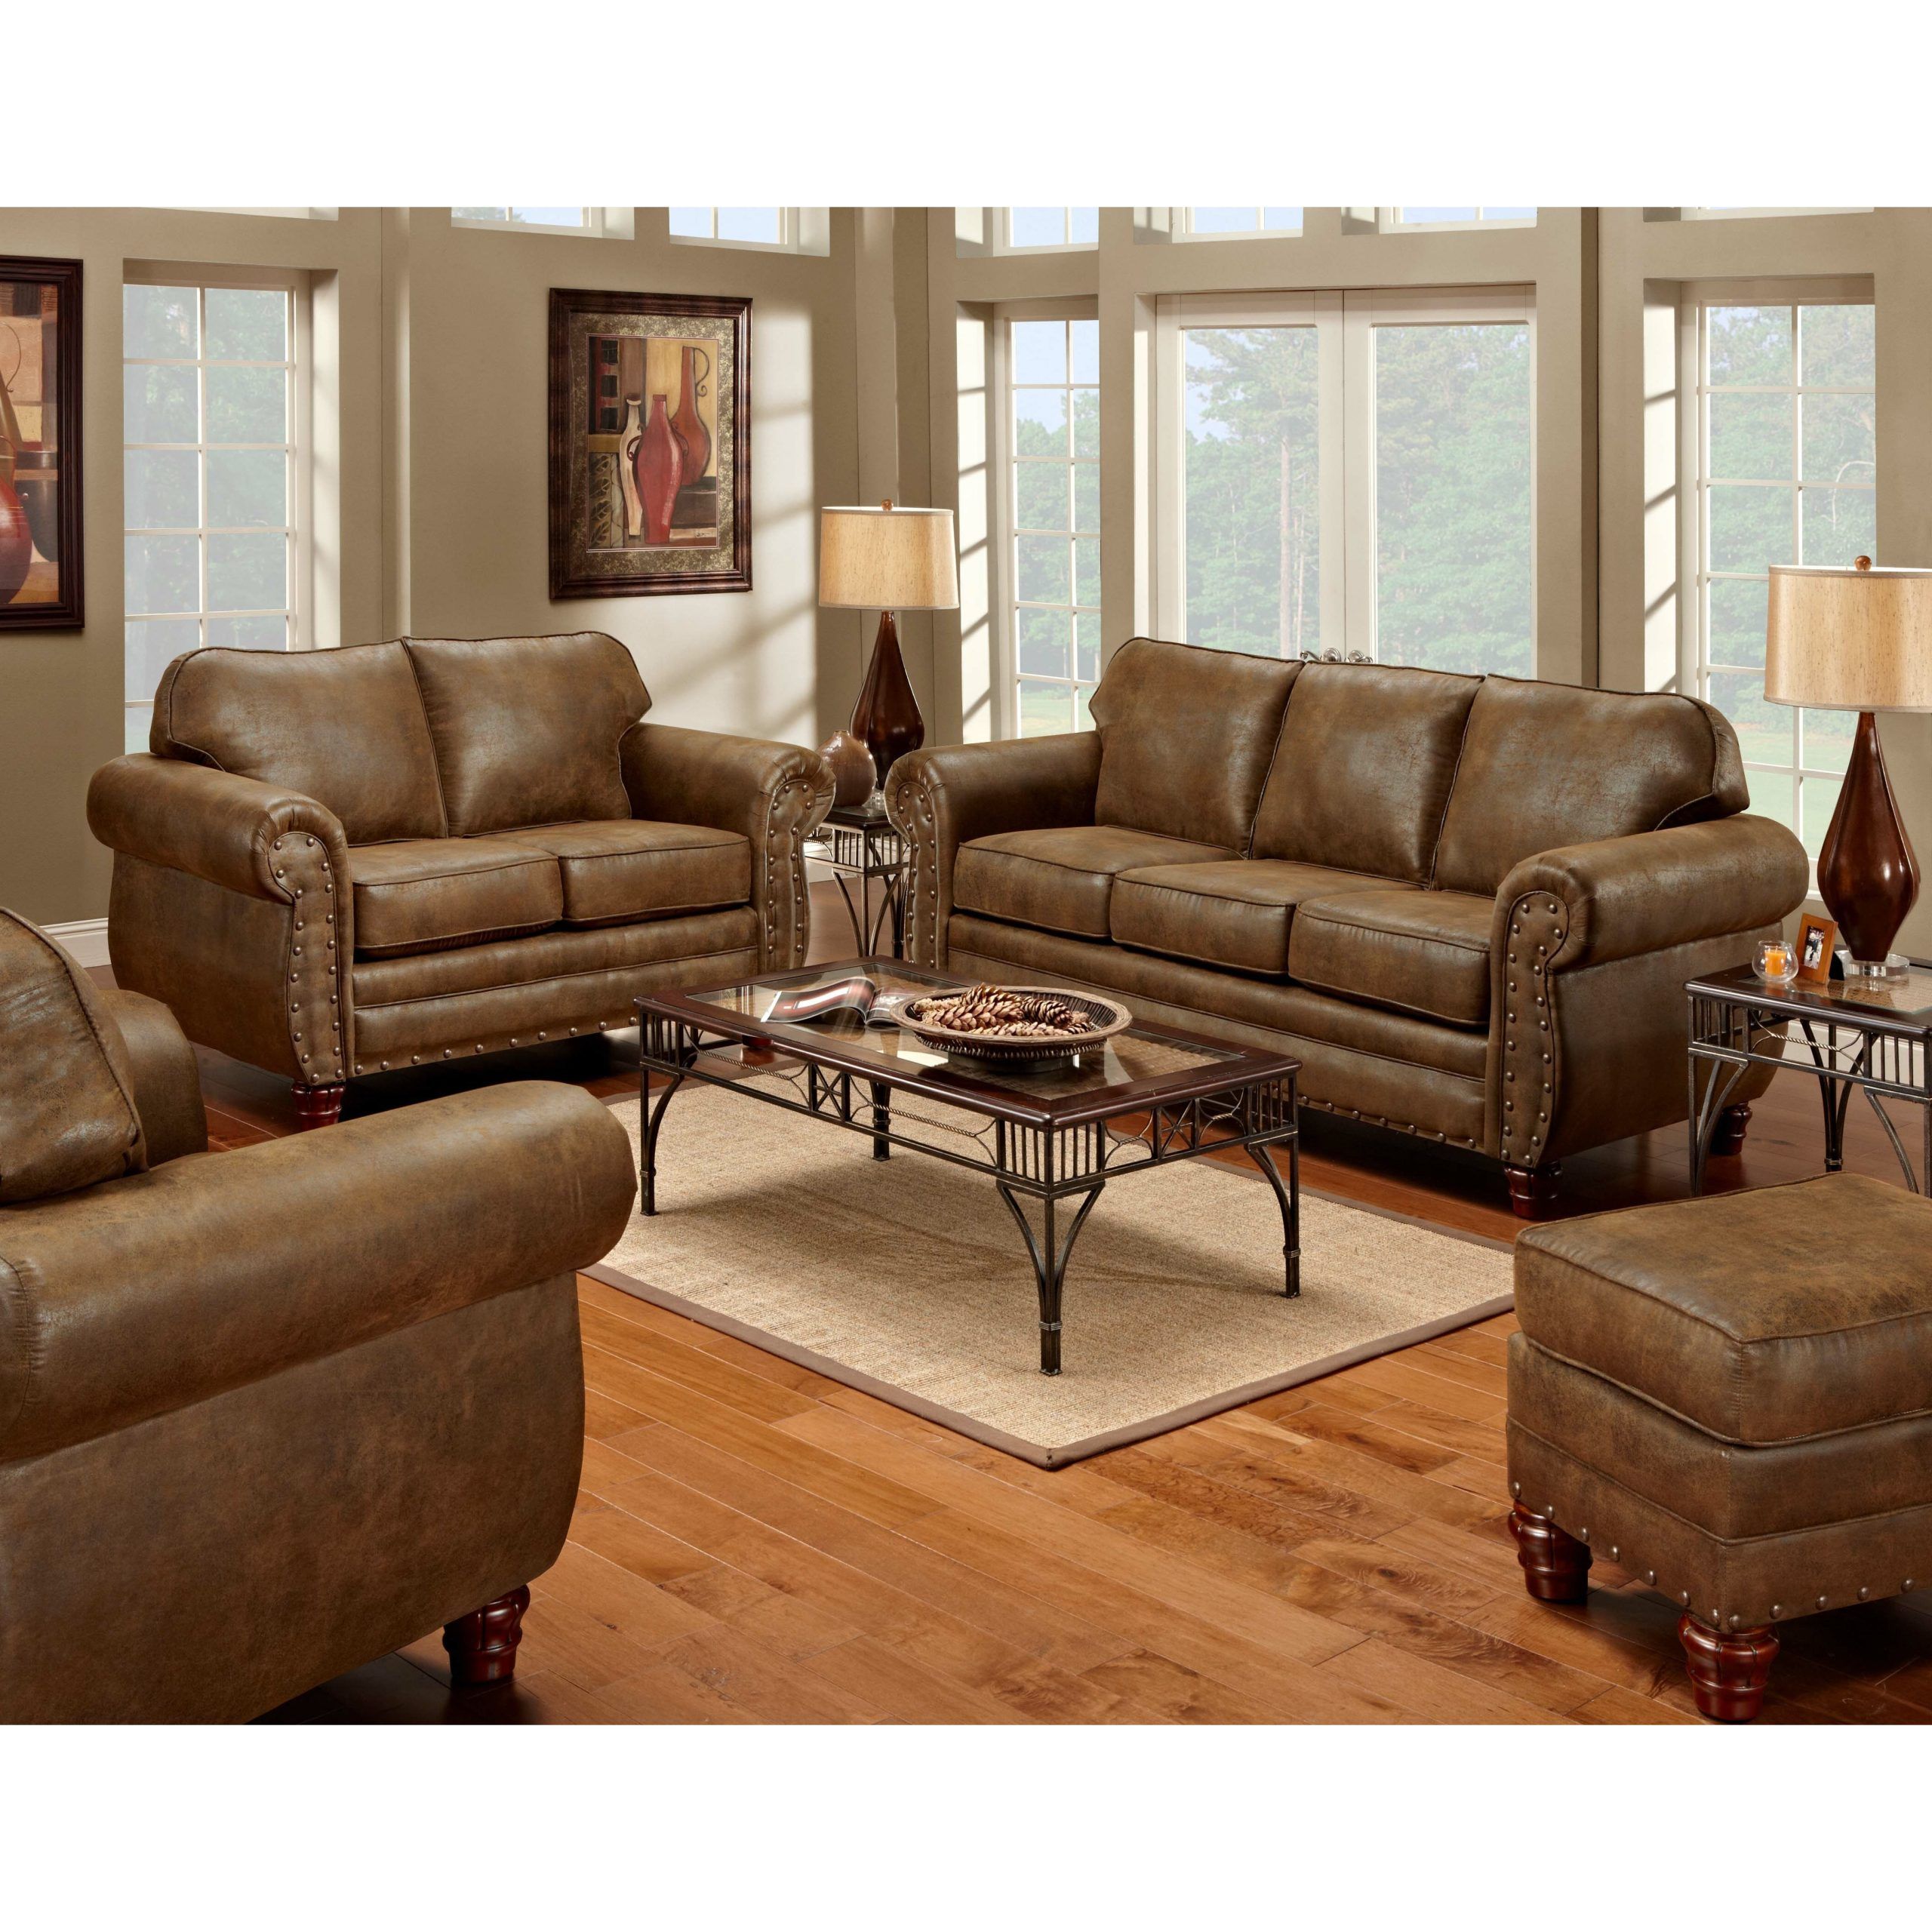 Well Liked Sofas For Living Rooms With American Furniture Classics Sedona 4 Piece Living Room Set With Sleeper (View 7 of 15)